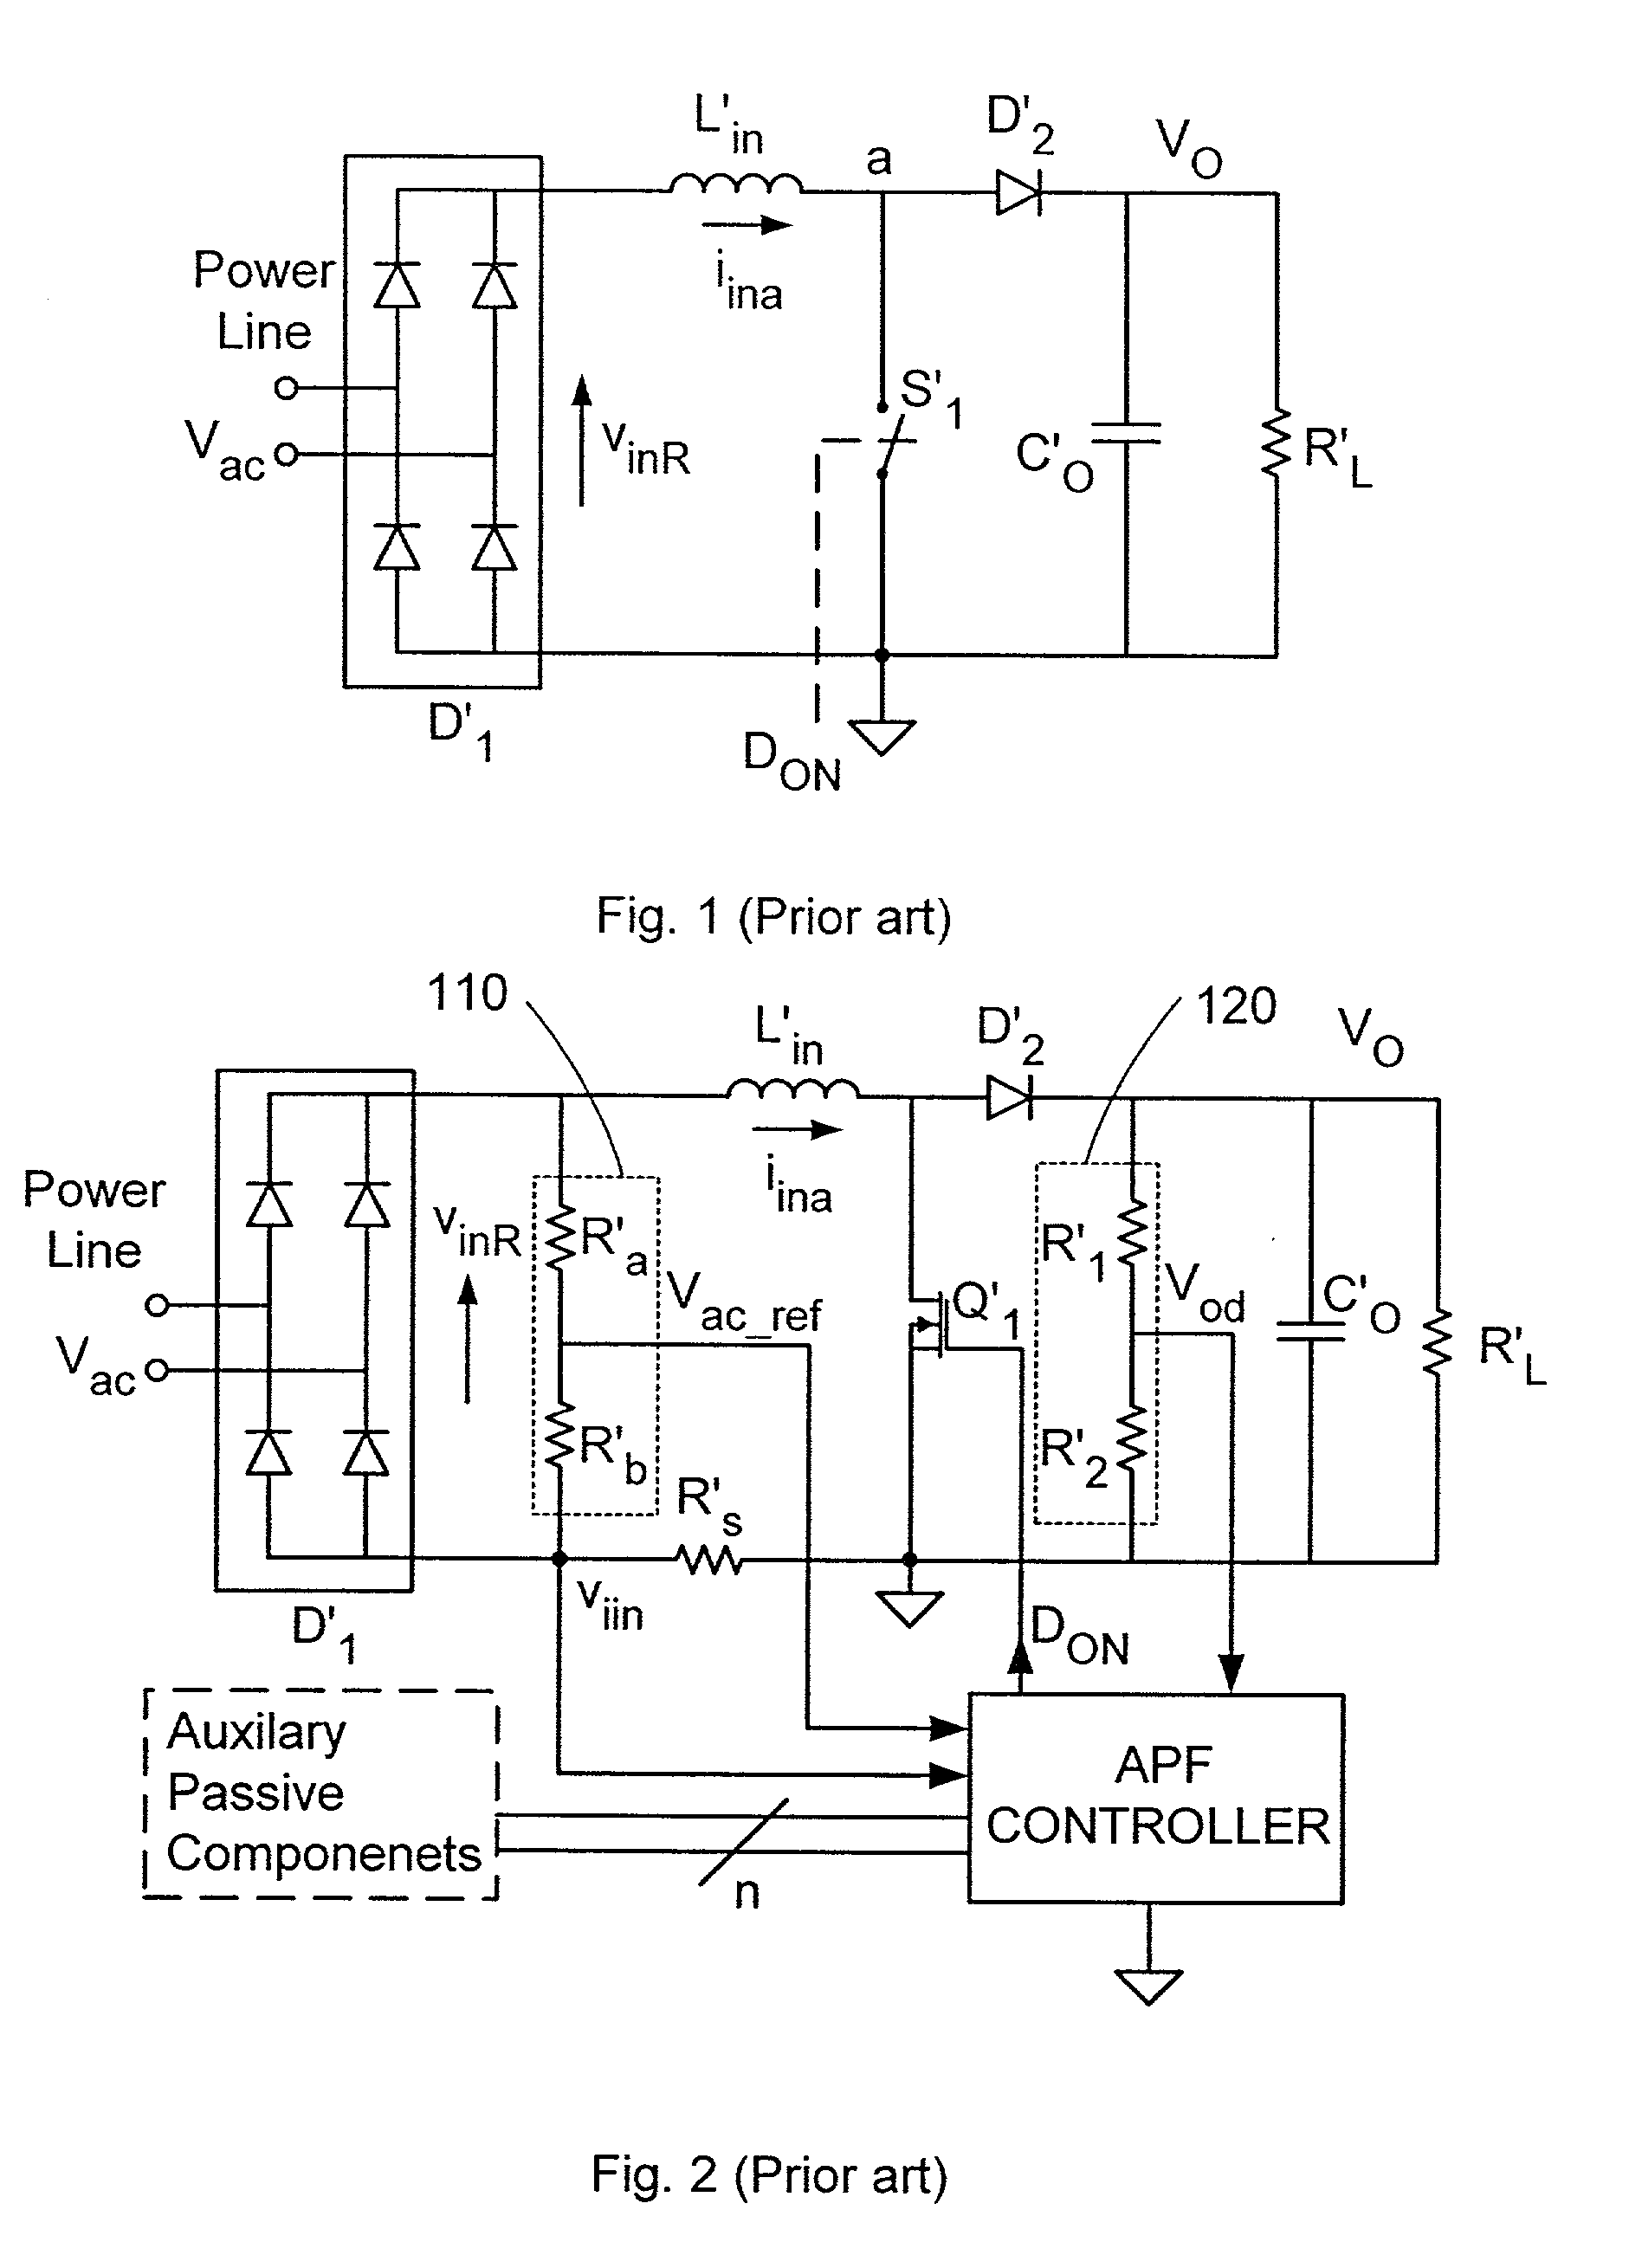 Method and apparatus for active power factor correction with minimum input current distortion